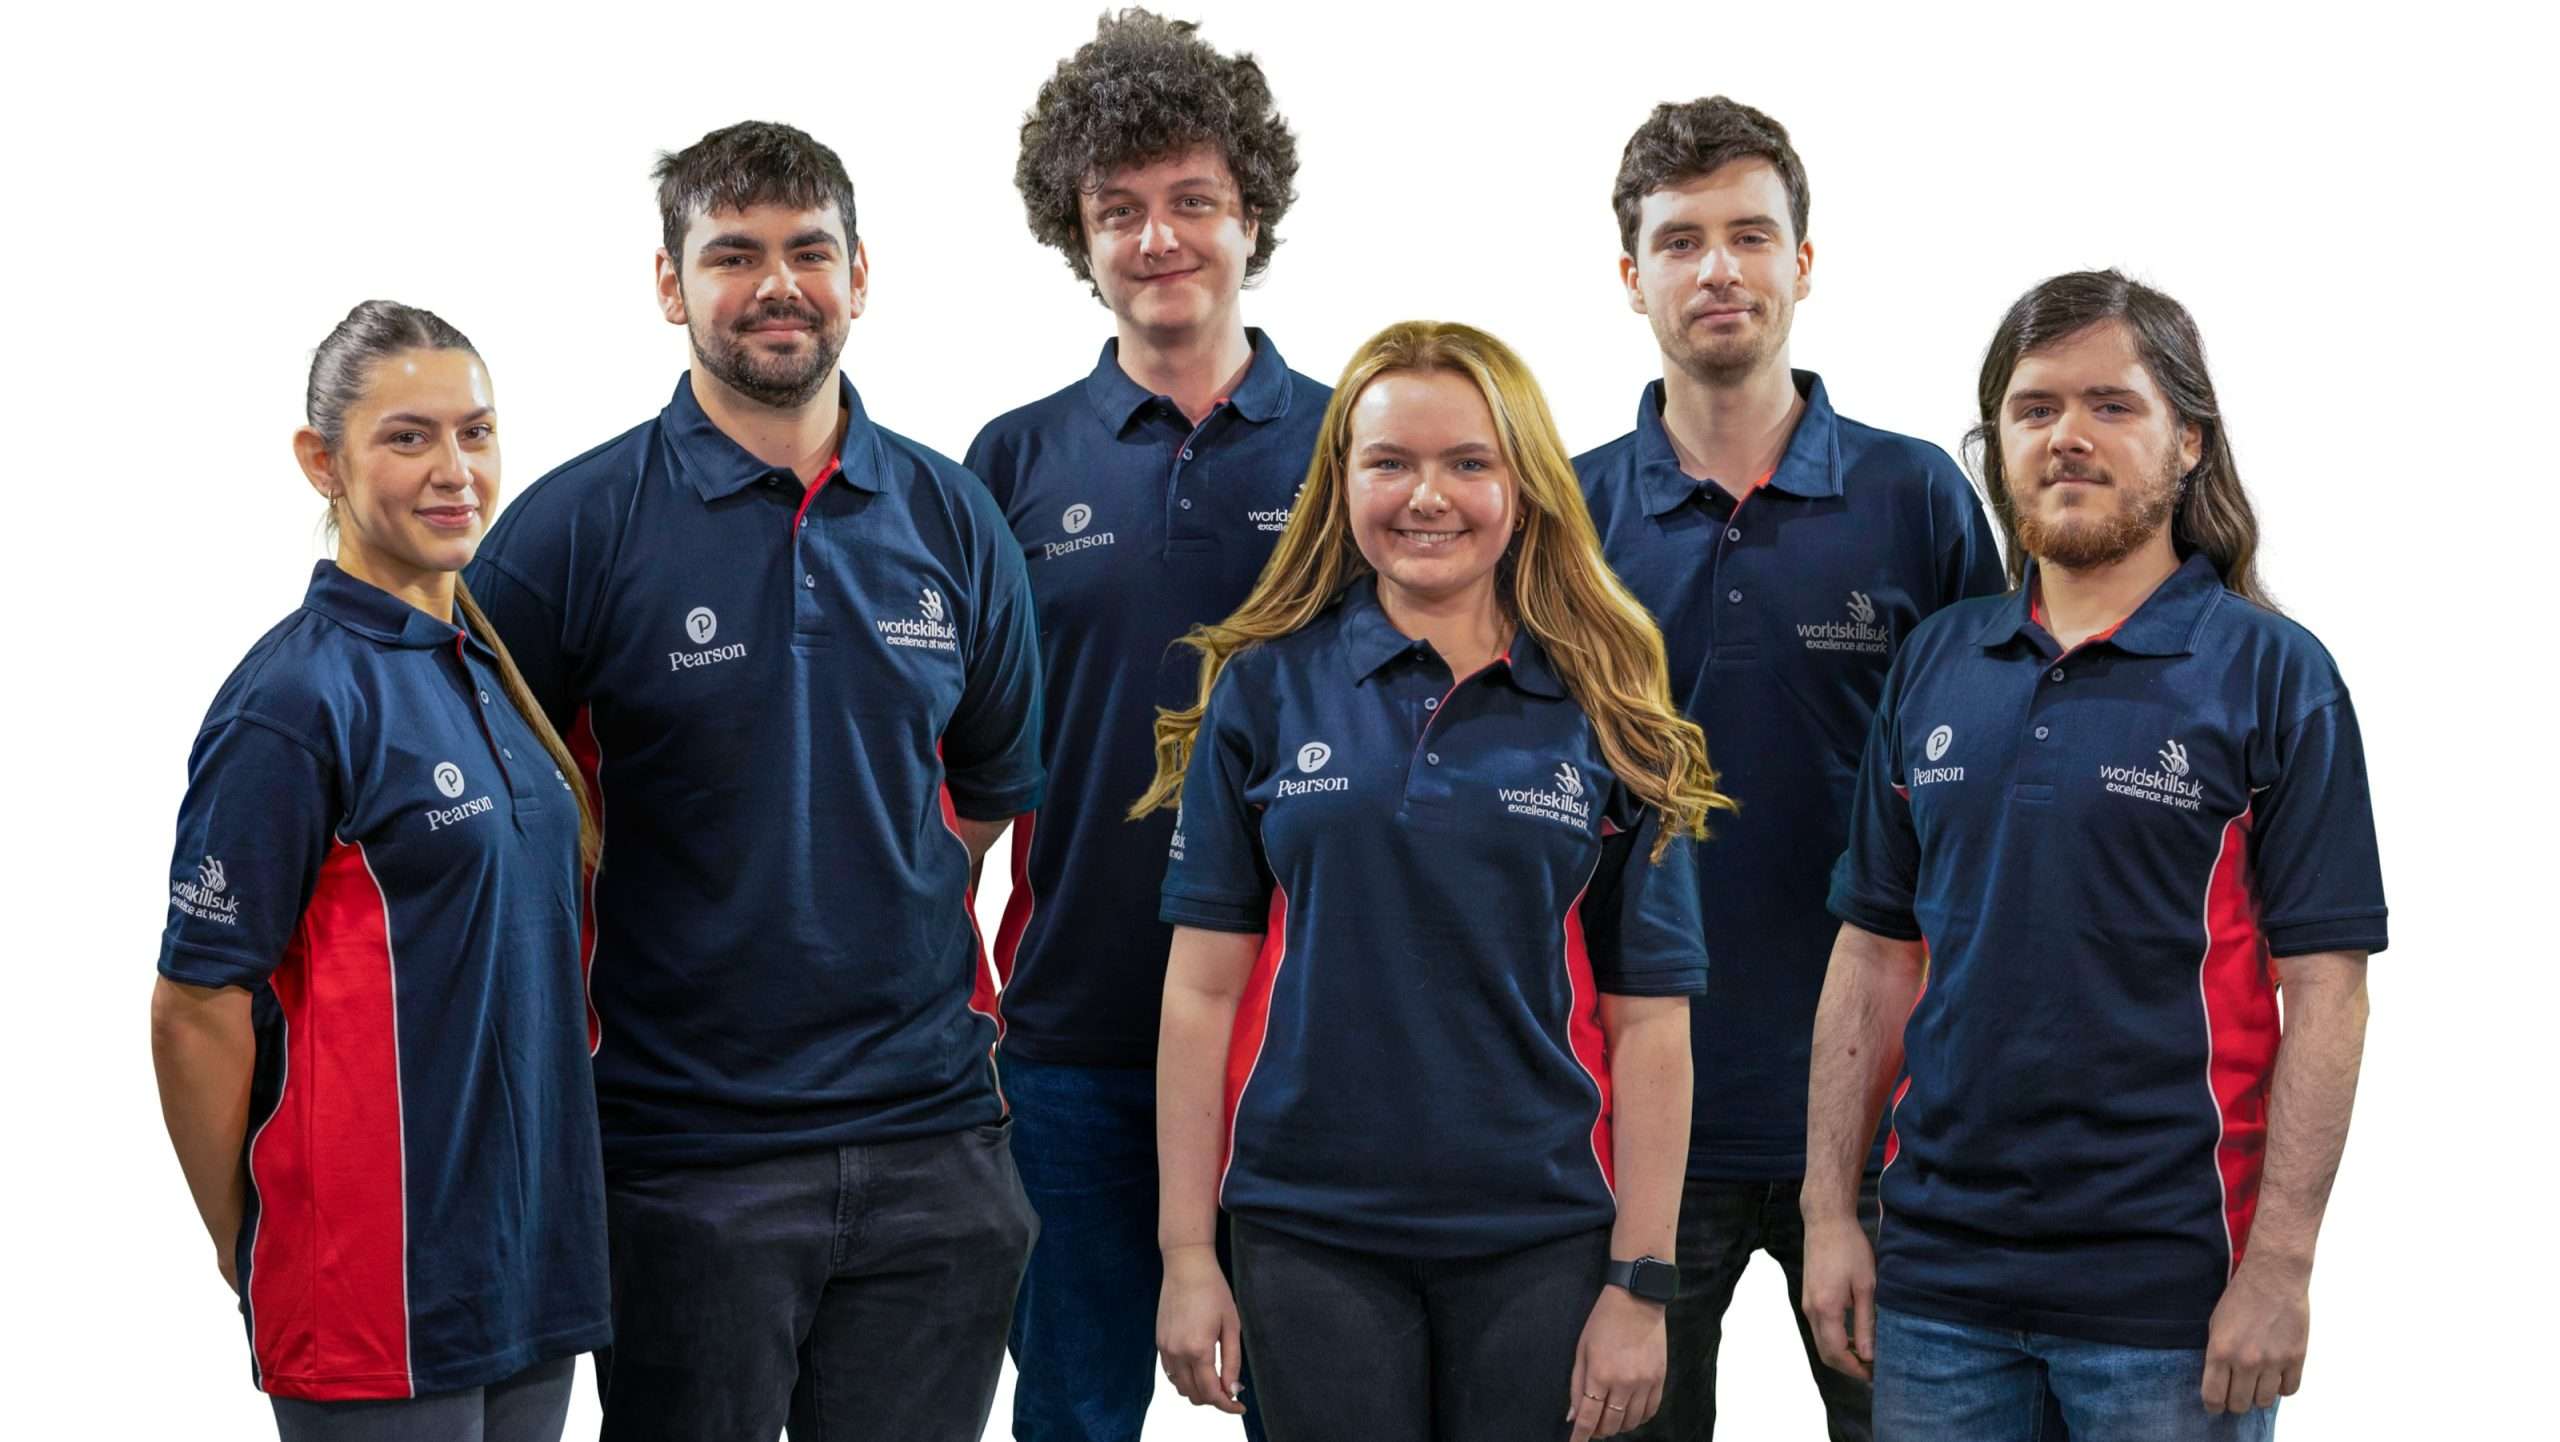 Six Welsh students and apprentices selected to represent Team UK at WorldSkills Lyon 2024